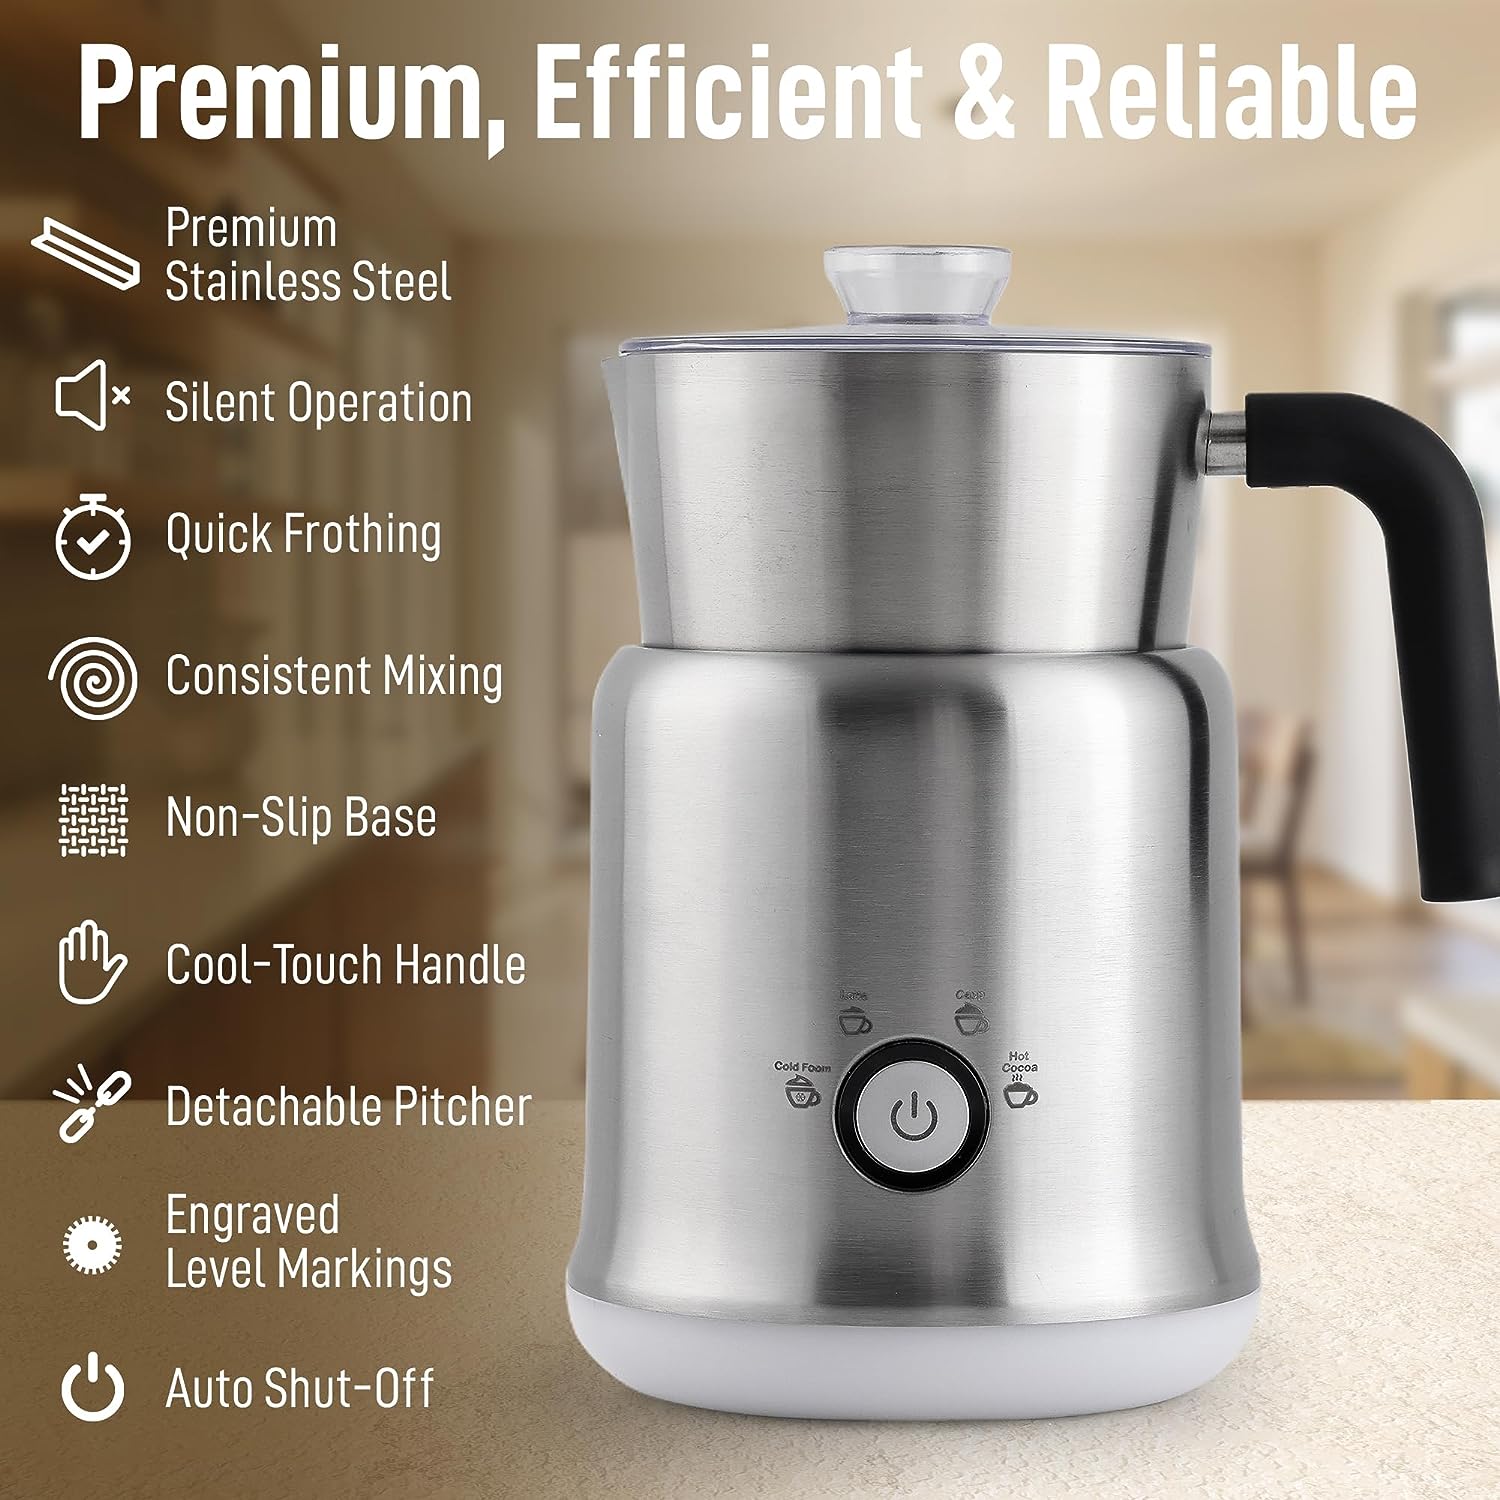 Kettle & Milk Frother